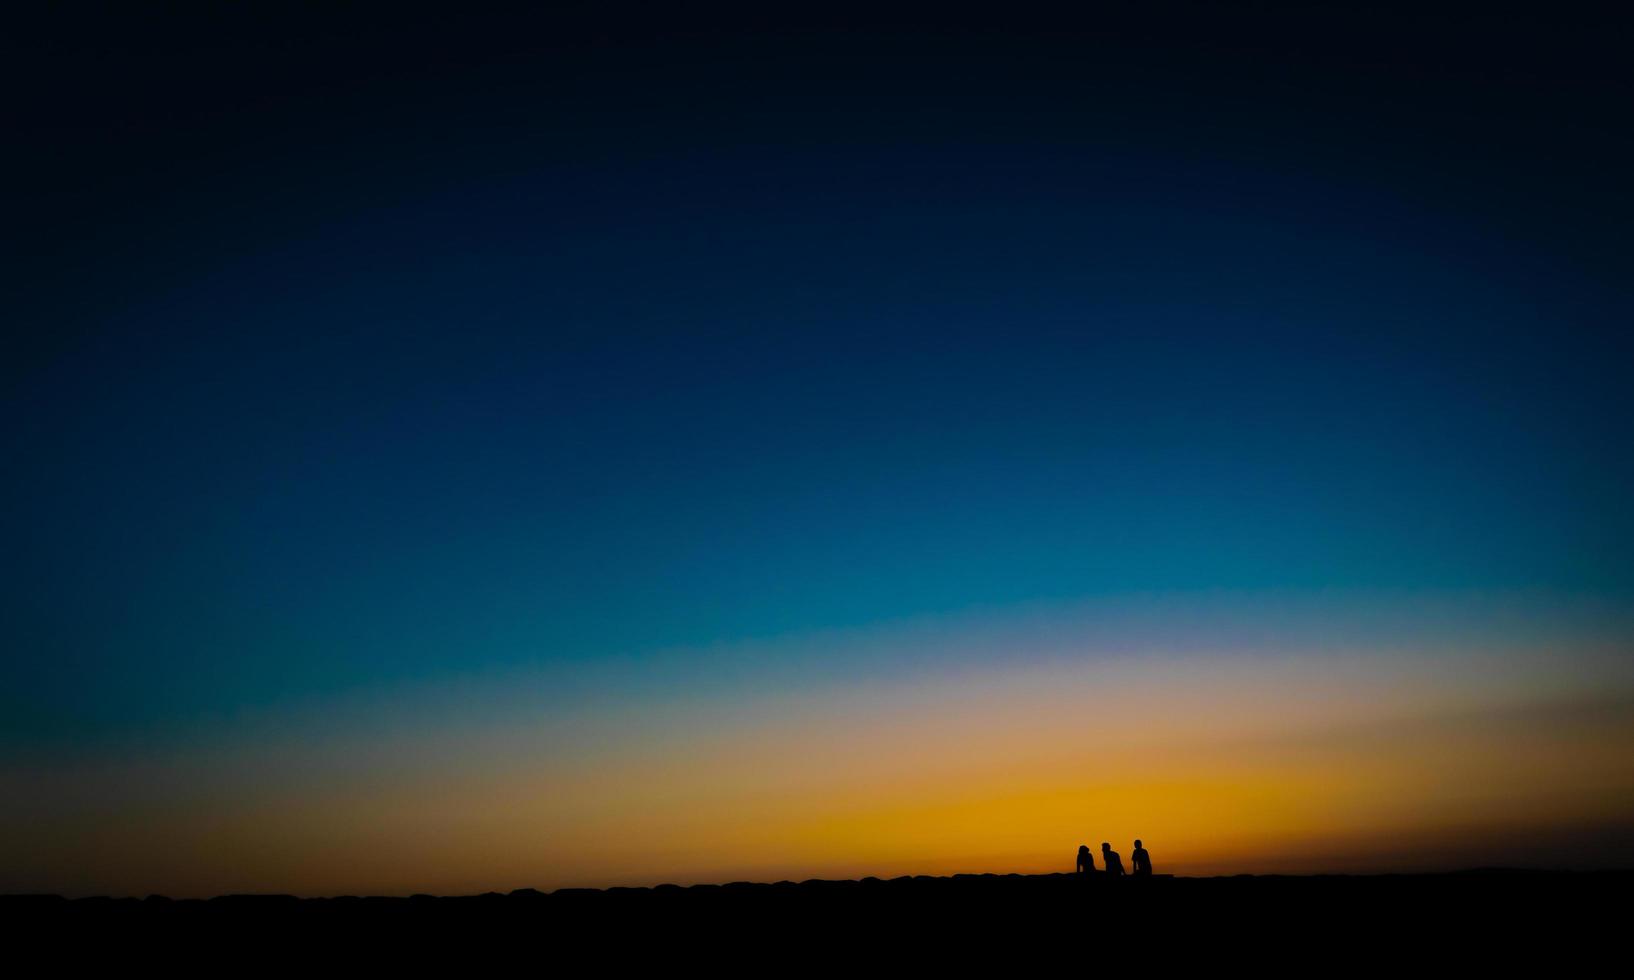 Fine art style image of three people waiting for the sunset photo